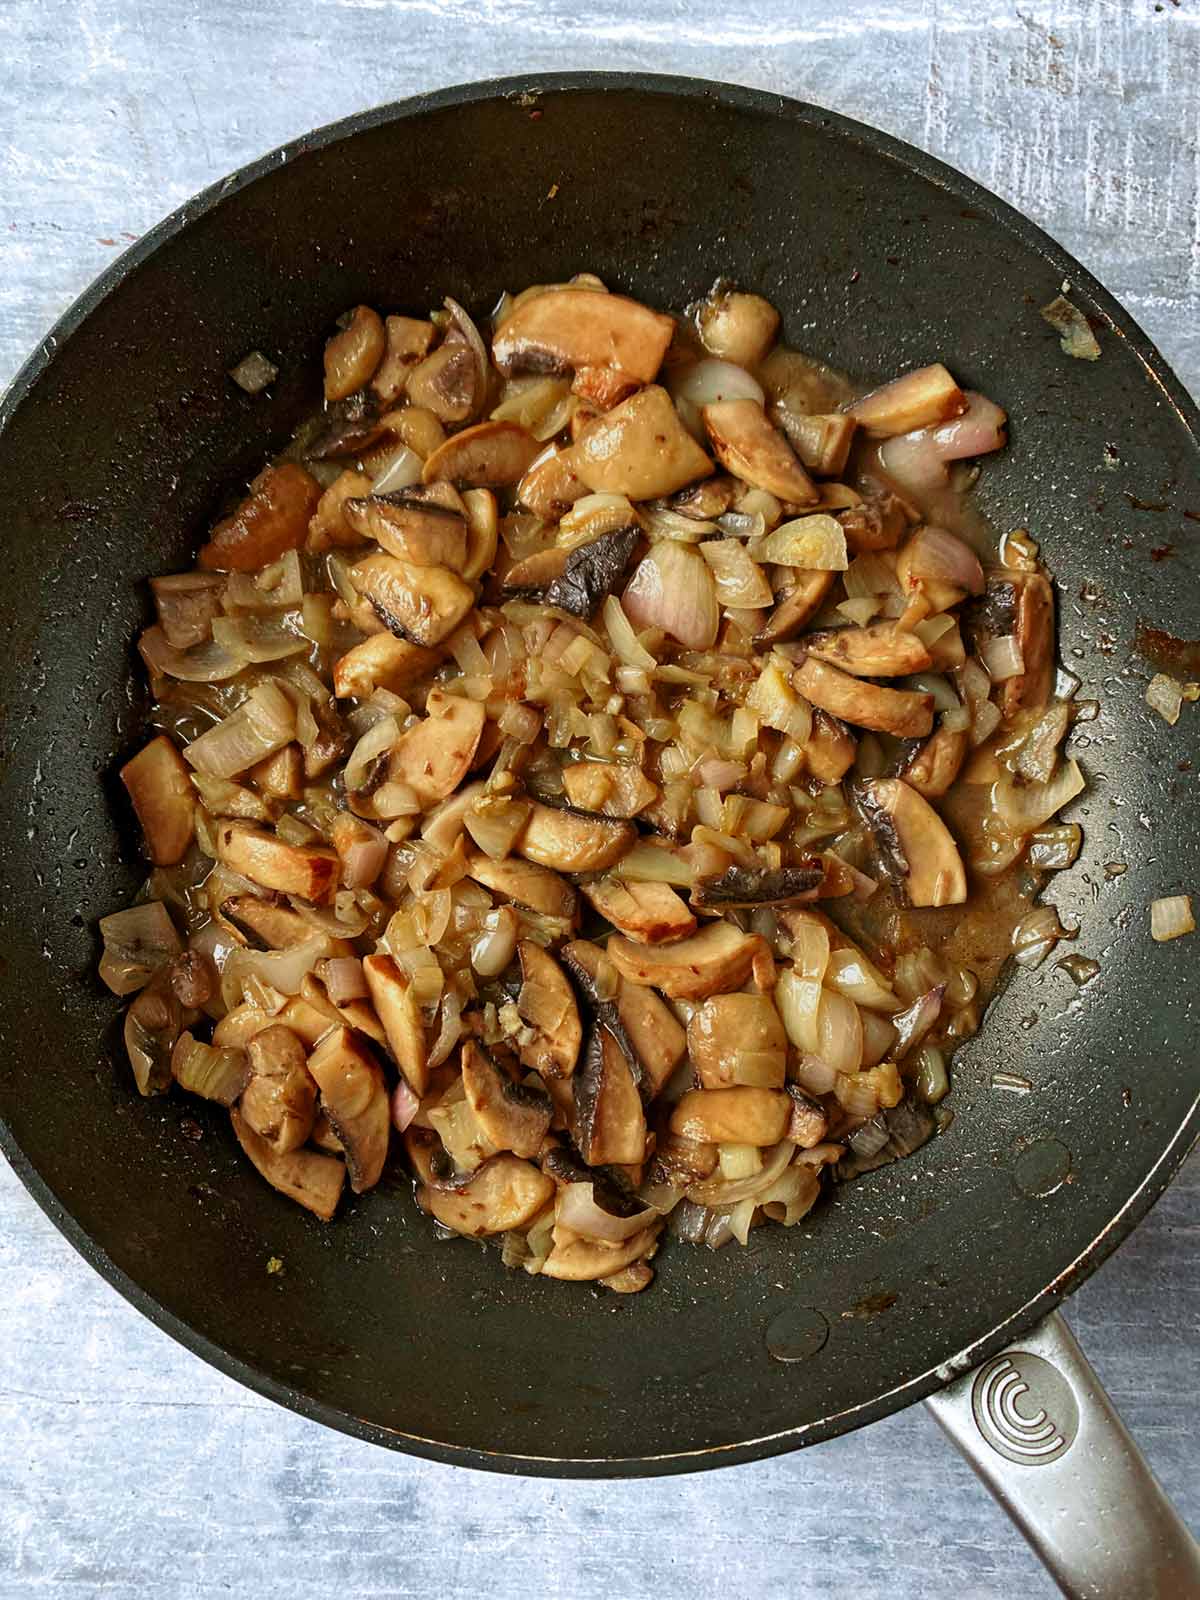 Chopped shallots and mushrooms cooking in a frying pan.